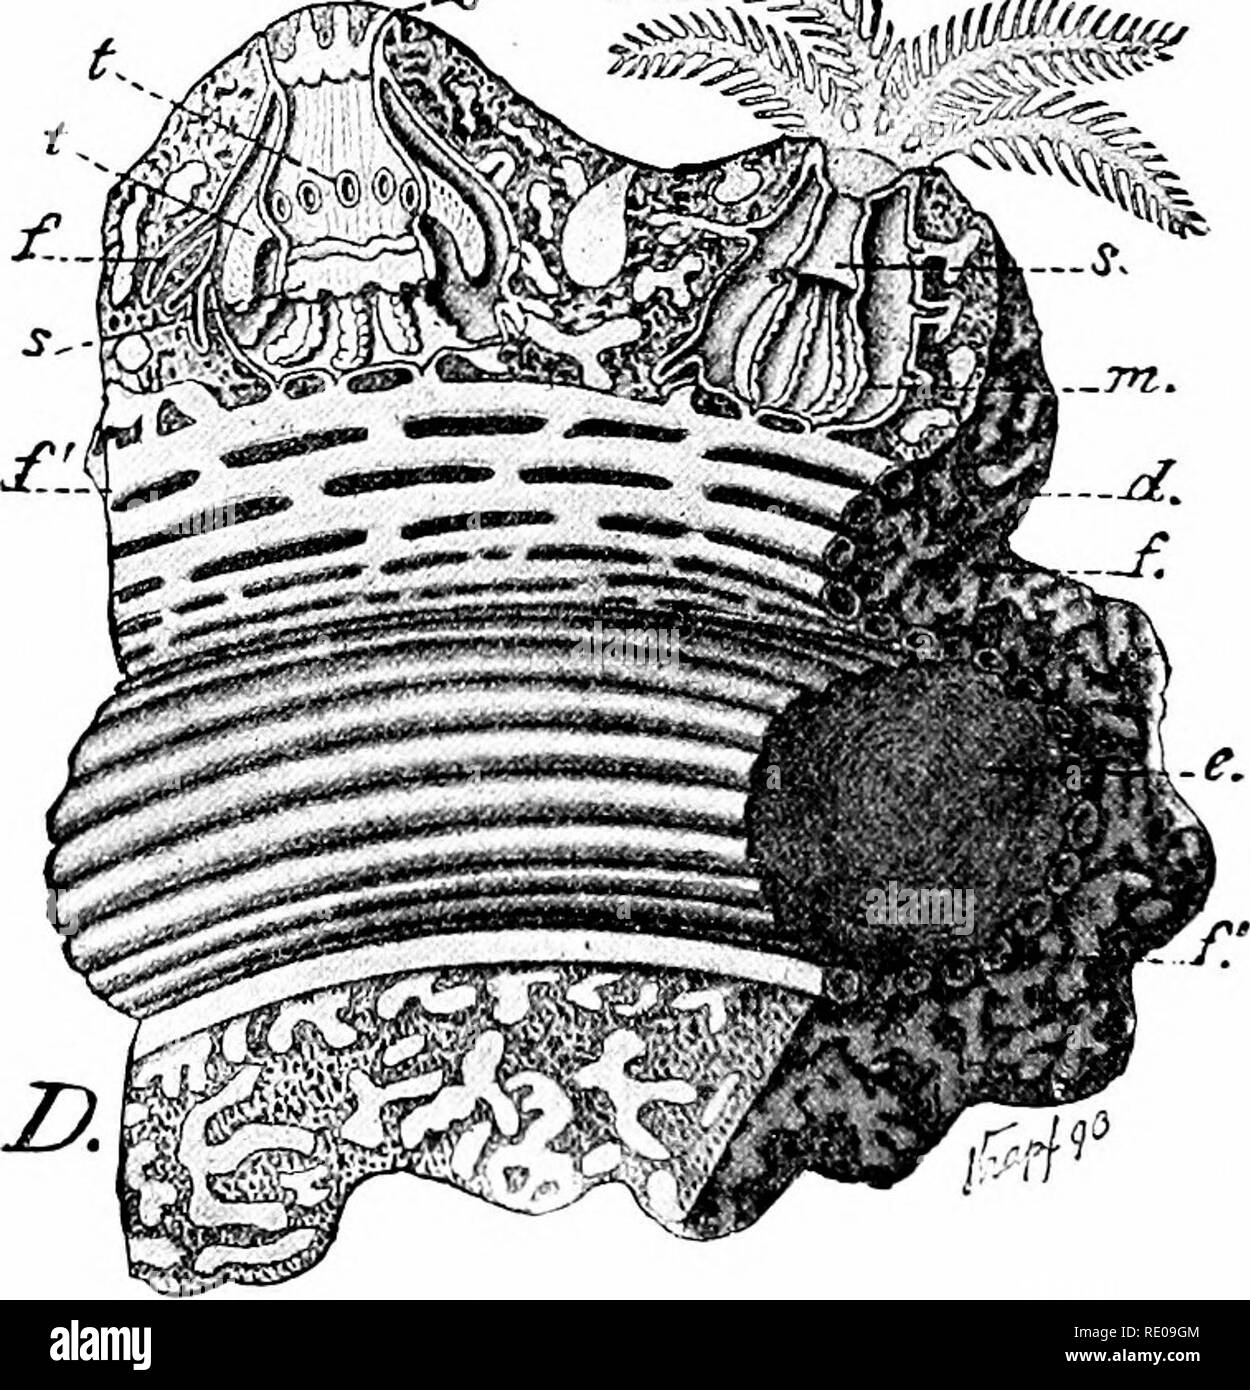 . A manual of zoology. Zoology. Fig. 206.âCoraXlium ruhruvi, vqH q(^v,, (After Lacazo Diitliiers.) -^, ciliated young; B, young colony ; C, part of colony with polyps in extension (o) and contrac- tion {(â ); d, co3nosarc; D^ stereogram of a brancli; h, c, partly and completely re- tracted polyps; r/, ccenosarc; c, skeletal axis exposed: /', /, larger and smaller ccenosarcal canals; m, mesenterial filaments; *â , (.esophagus; t, retracted tentacles; A^ greatly, B, C I slightly enlarged. of these project on the outer surface as cos(a Still outside these may be a second cup, the epifhent. I Stock Photo